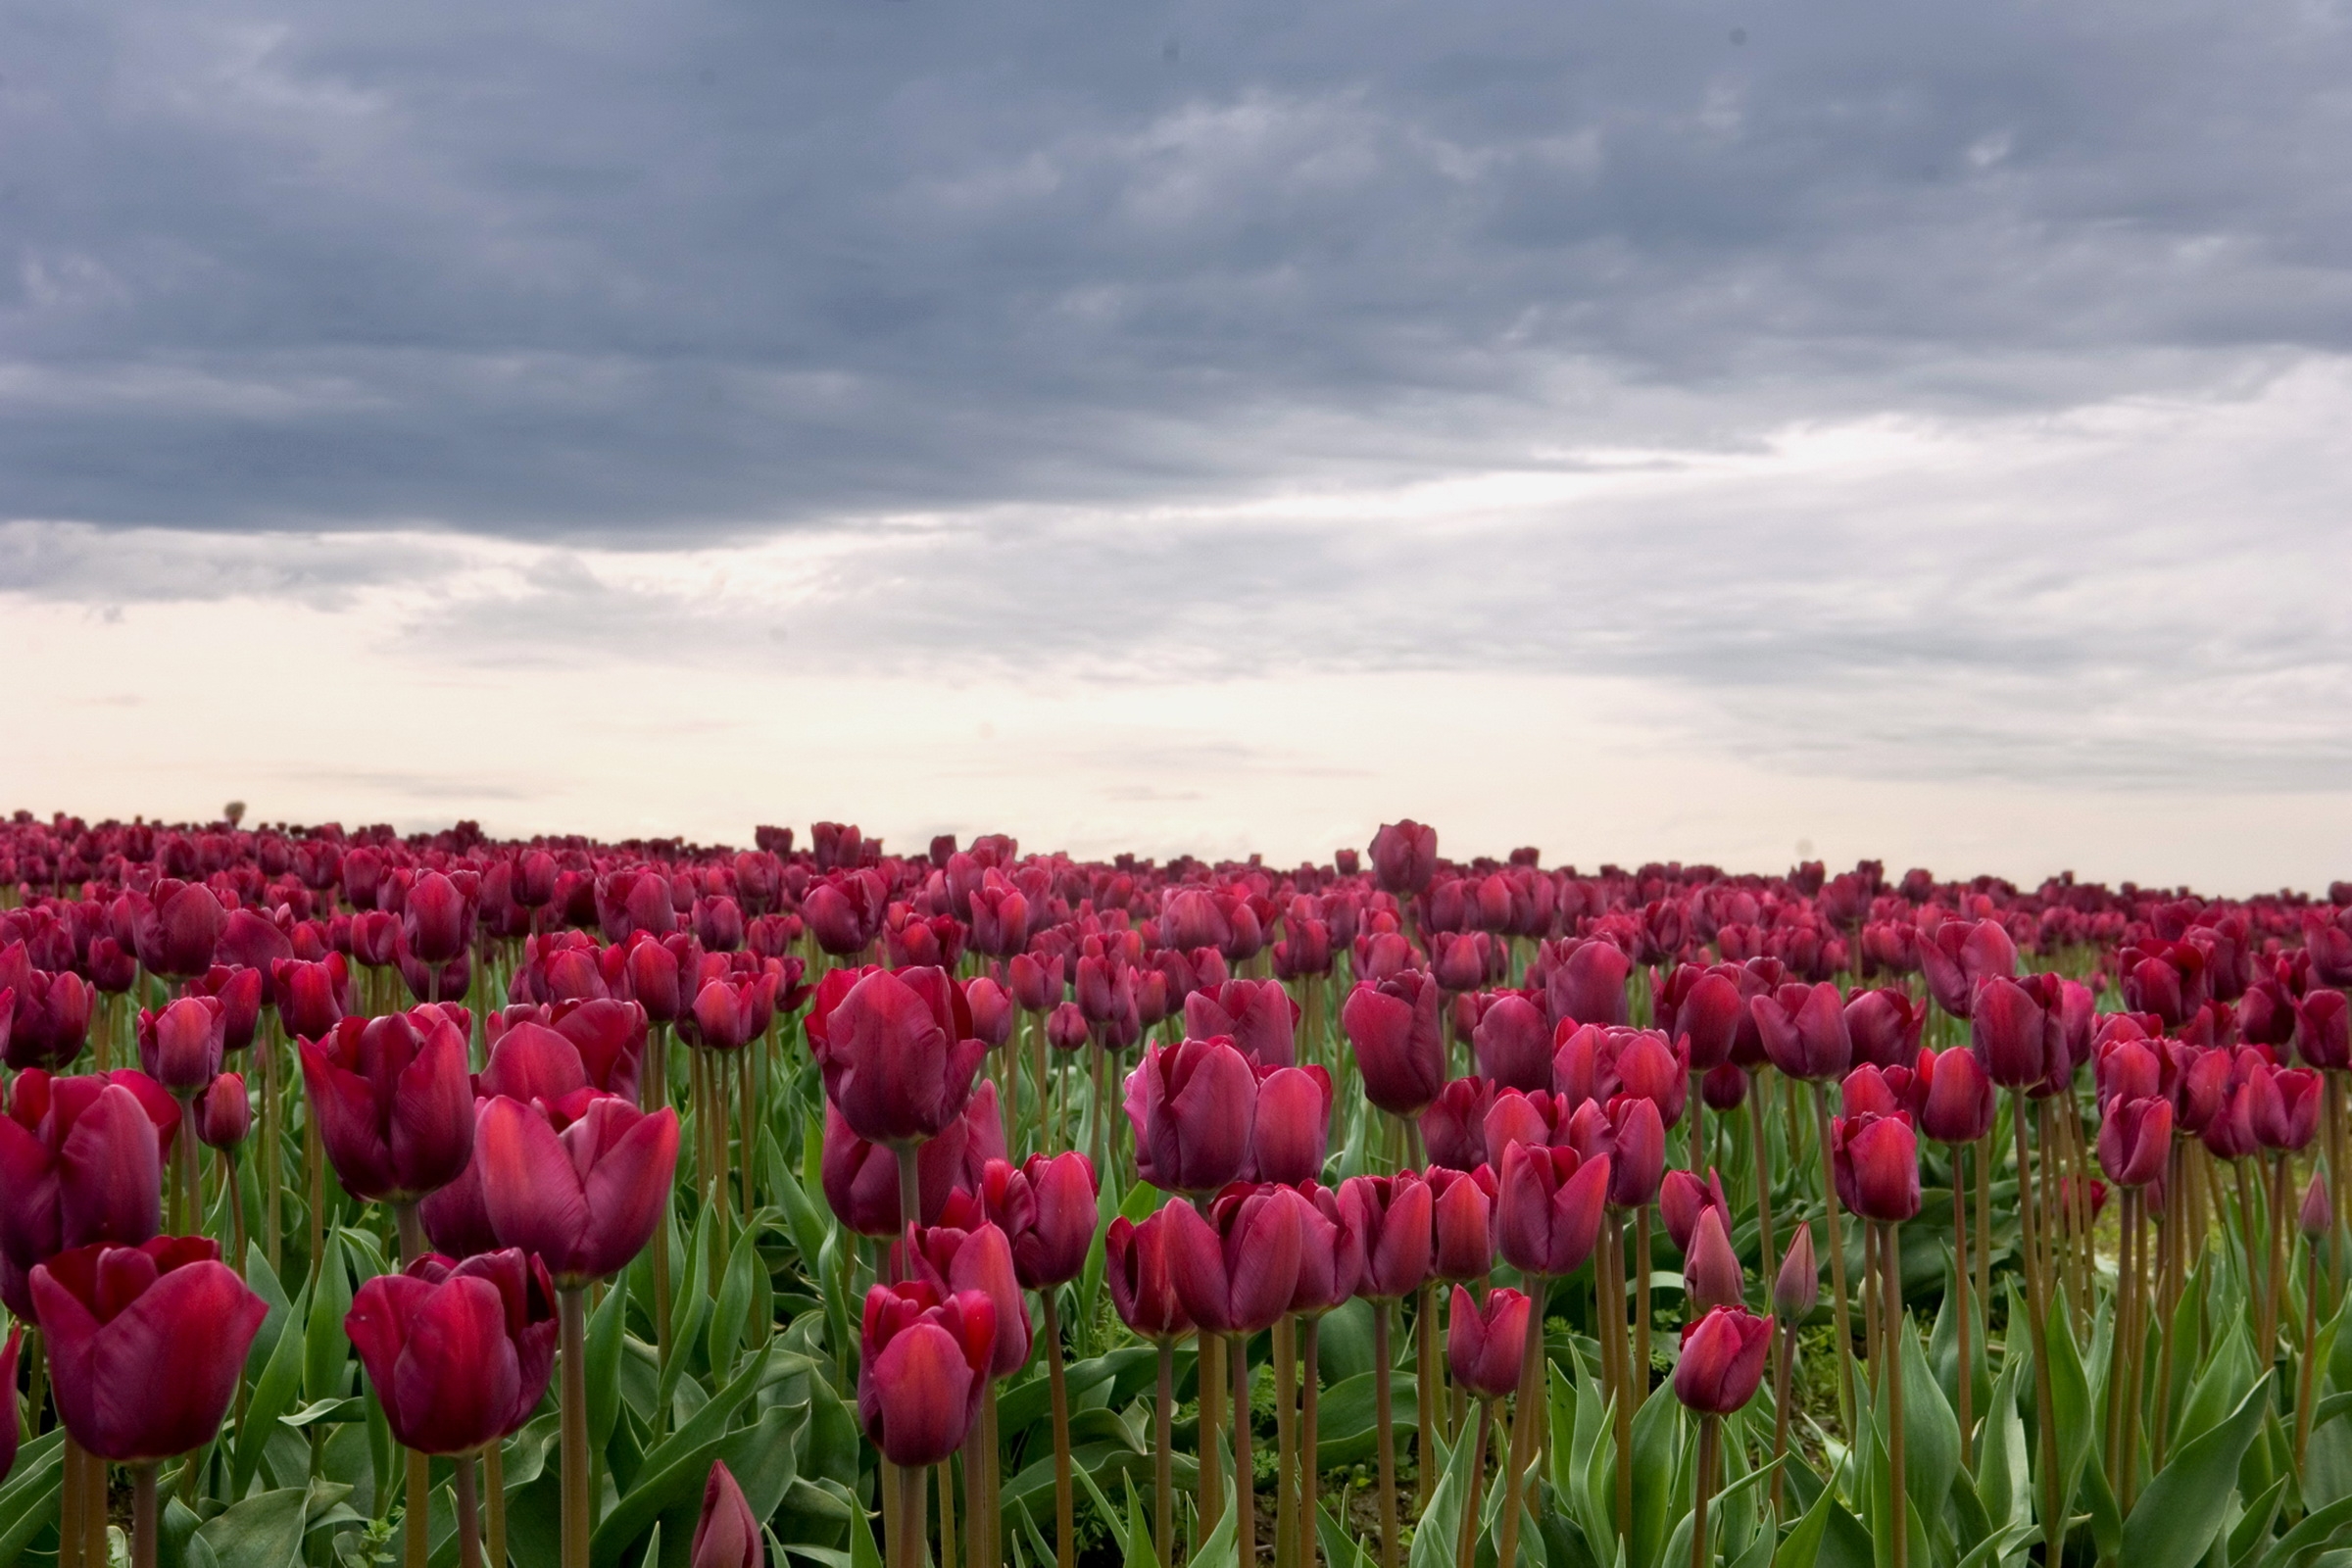 Cool Backgrounds mainly cloudy, overcast, flowers, tulips Field